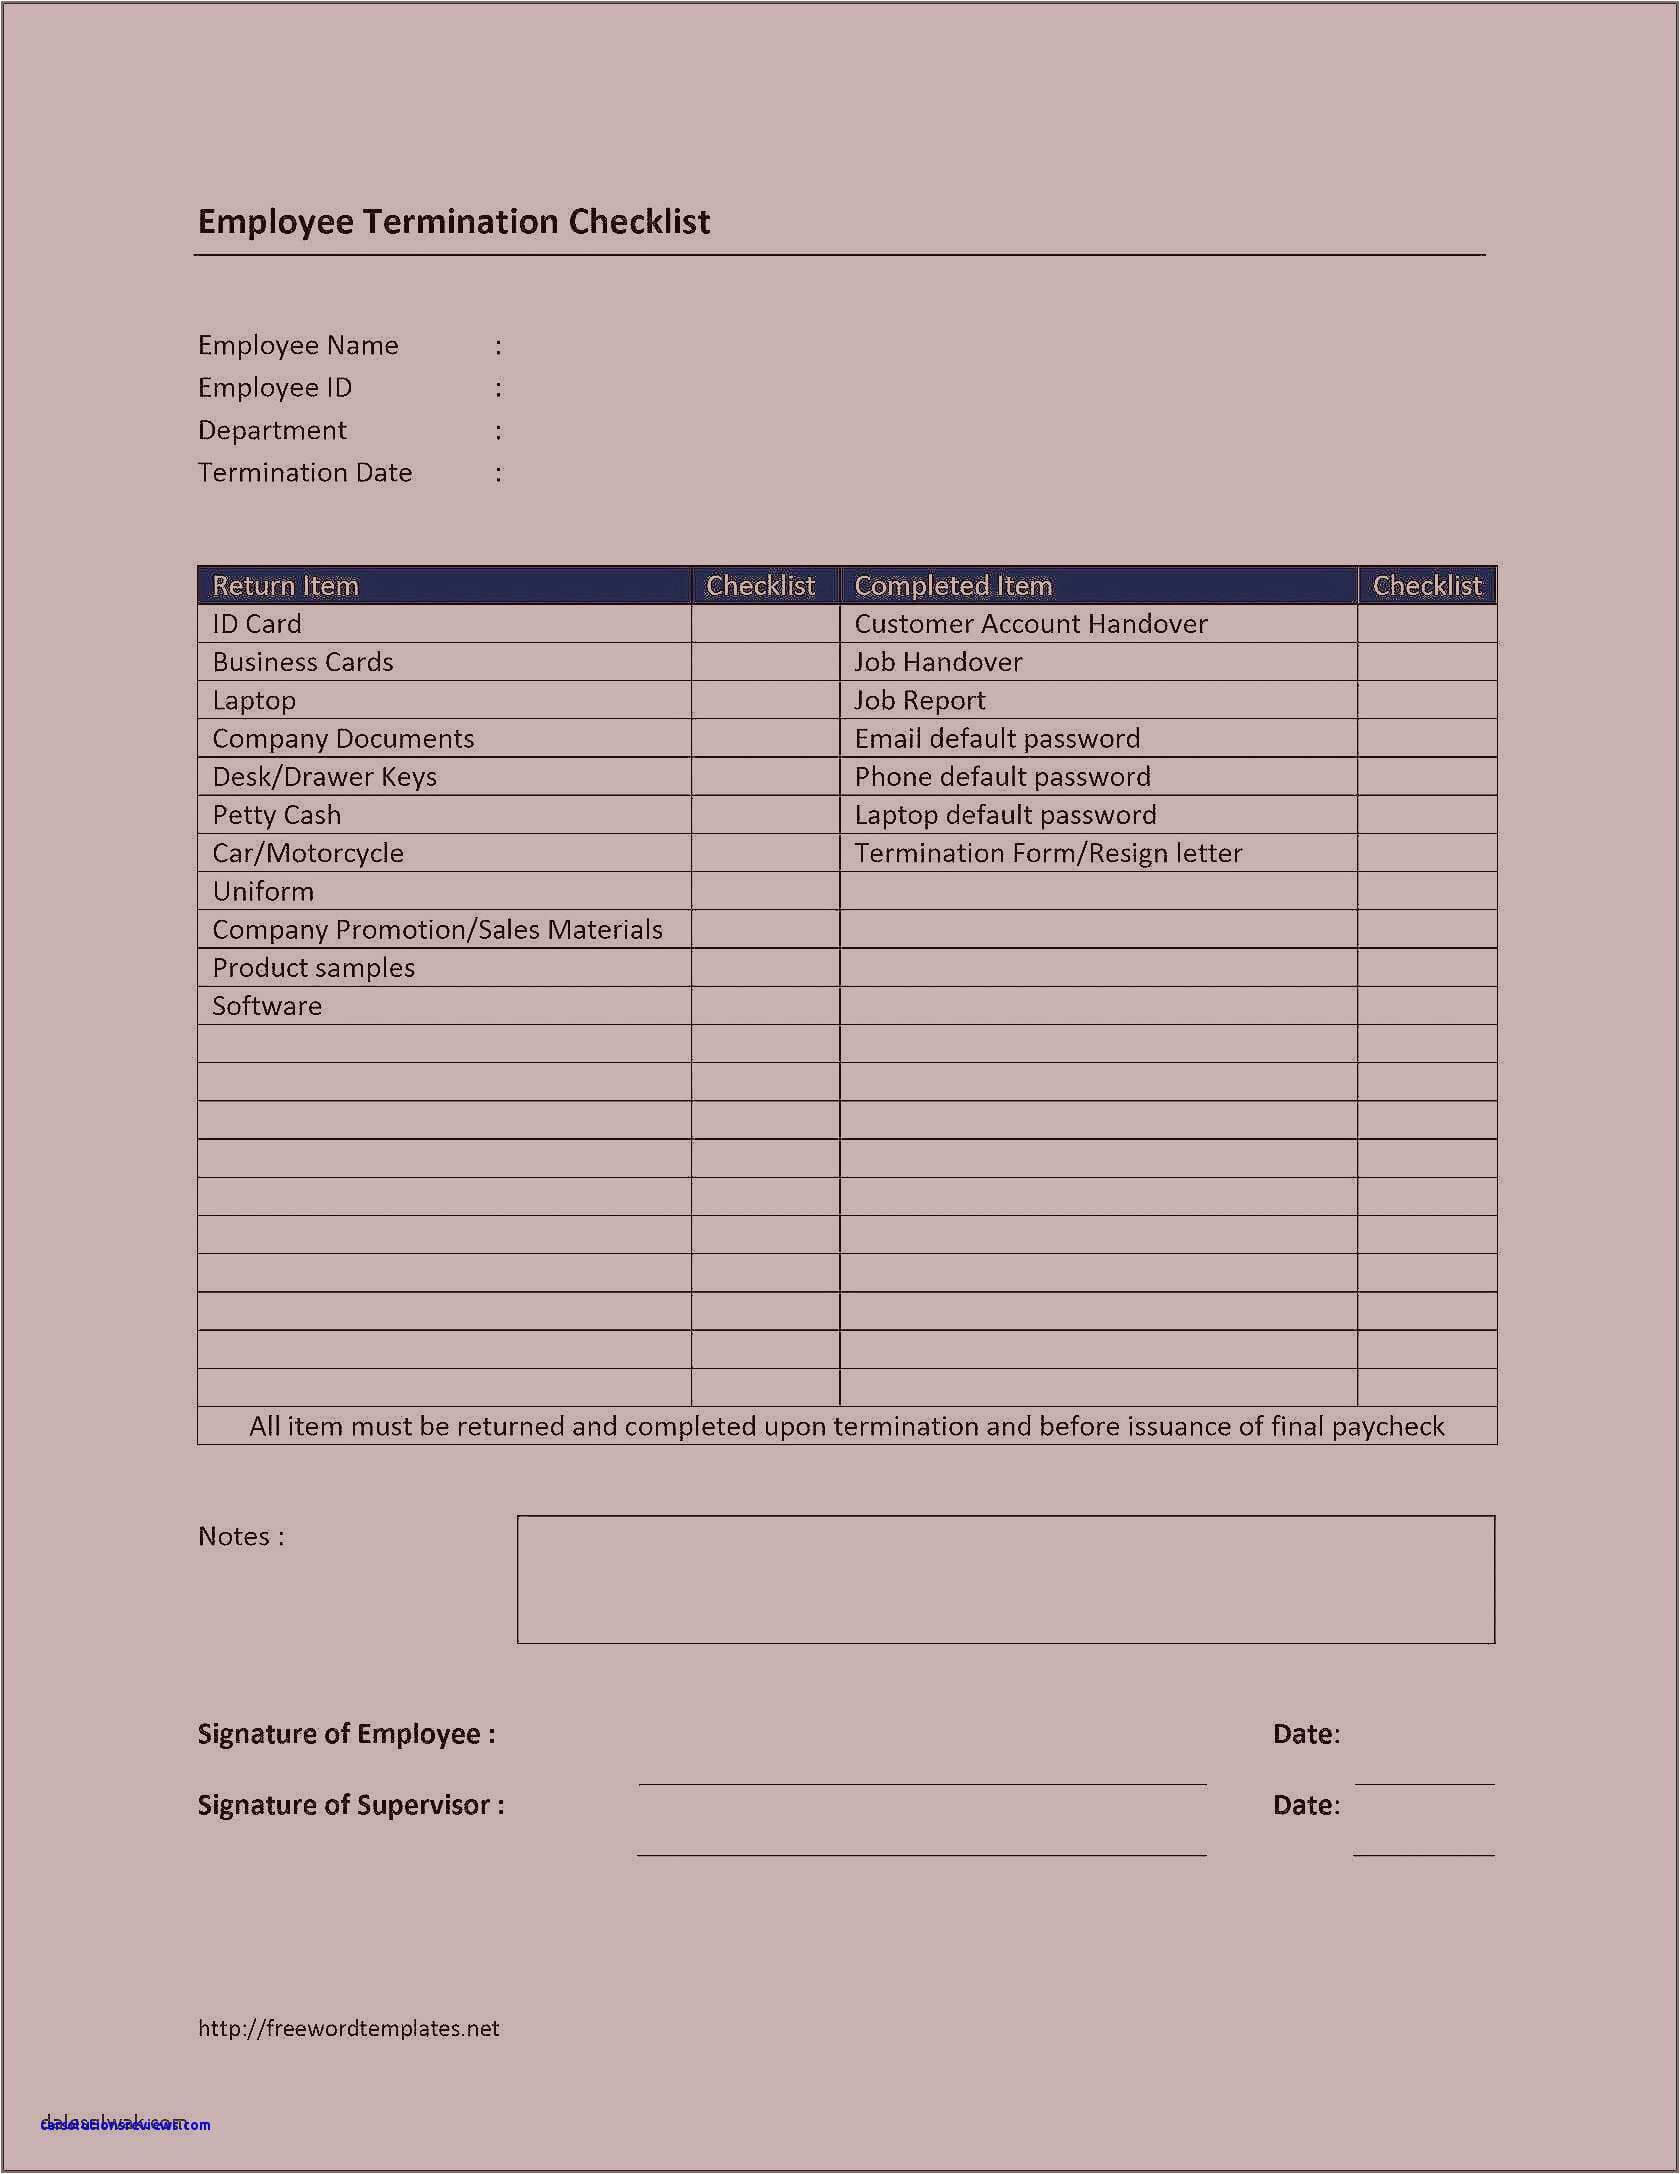 Reporting Requirements Template Excel Spreadsheet | Glendale Within Reporting Requirements Template